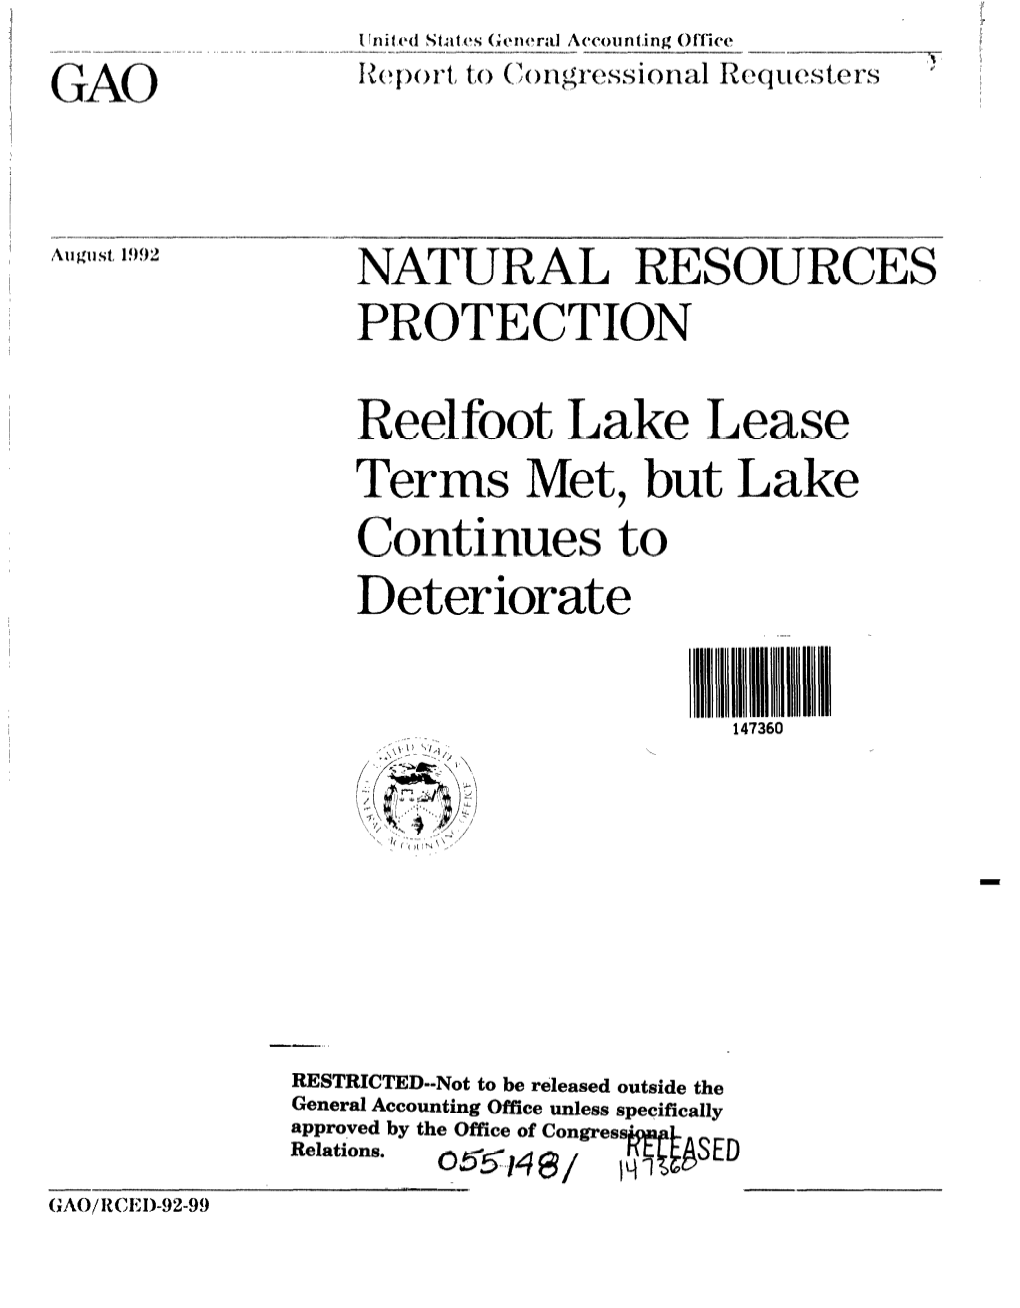 RCED-92-99 Natural Resources Protection: Reelfoot Lake Lease